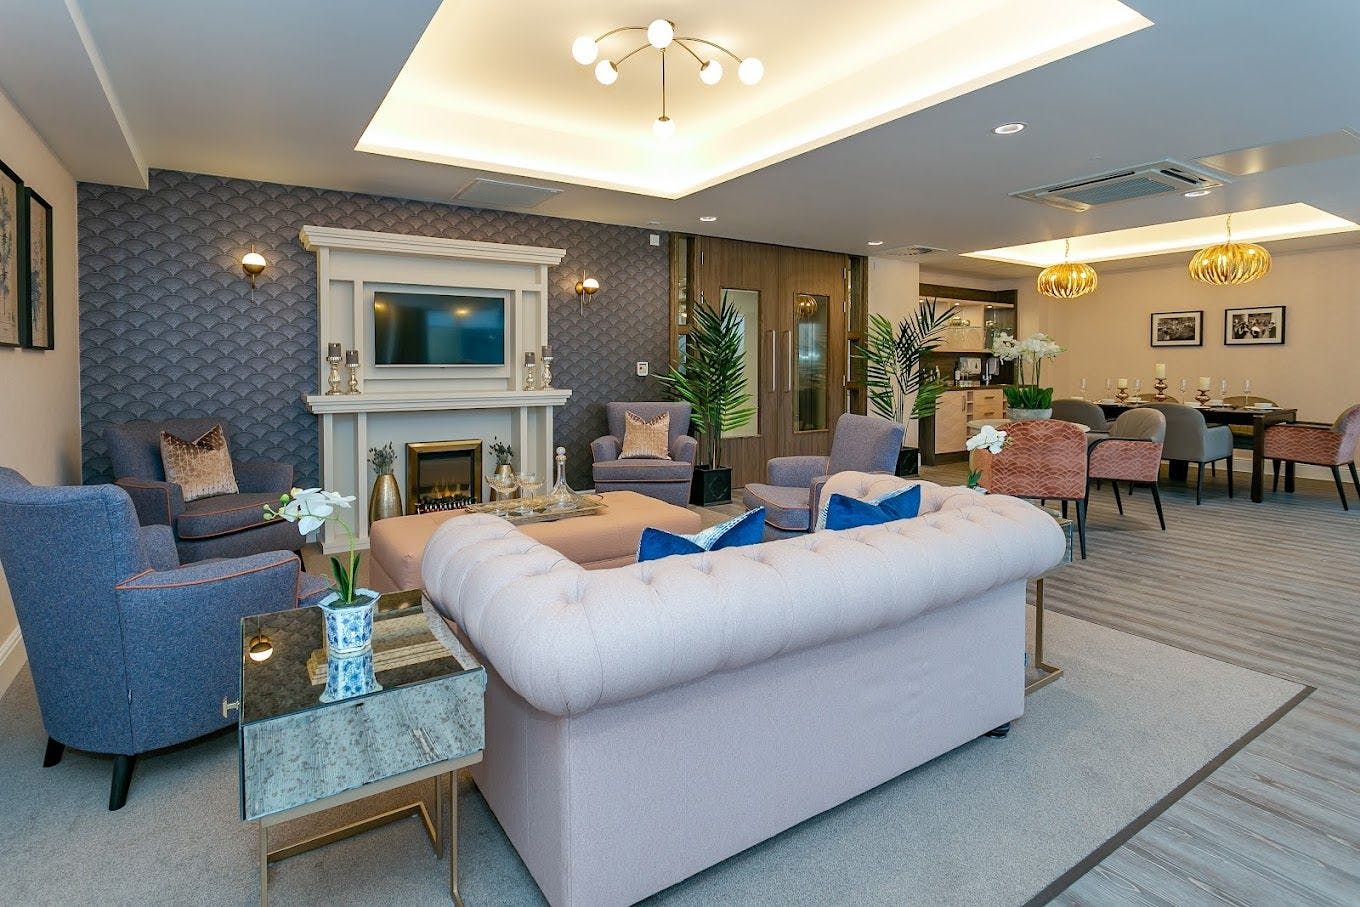 Lounge of Harcourt Gardens care home in Harrogate, Yorkshire